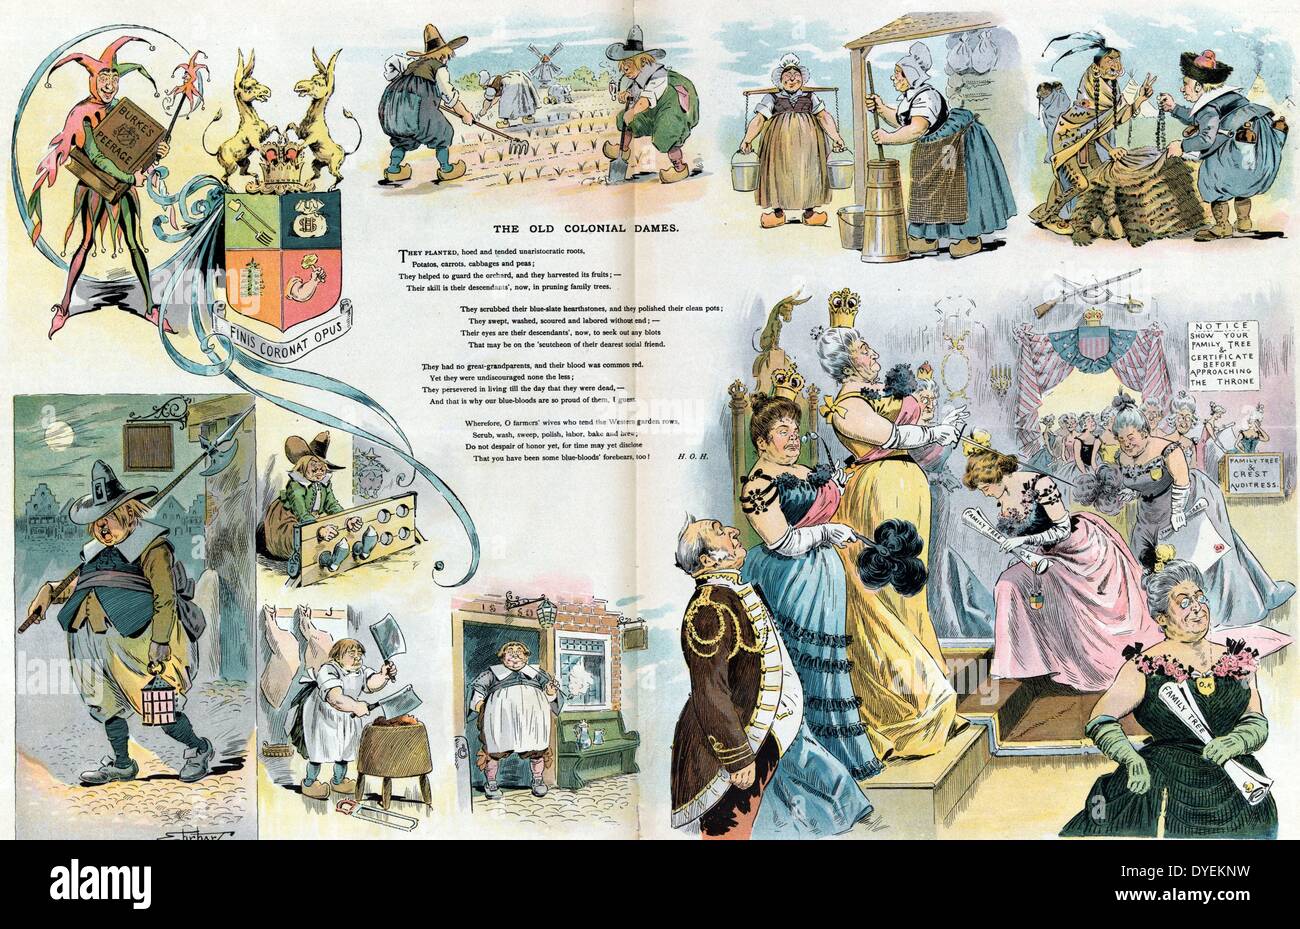 The old colonial dames By Samuel Ehrhart, 1862-1937, artist Published 1899. Print shows a vignette cartoon with scenes of colonial men and women working at domestic and blue collar chores and jobs, leading to a scene with upper class women, each clutching an approved 'Family Tree'. Stock Photo